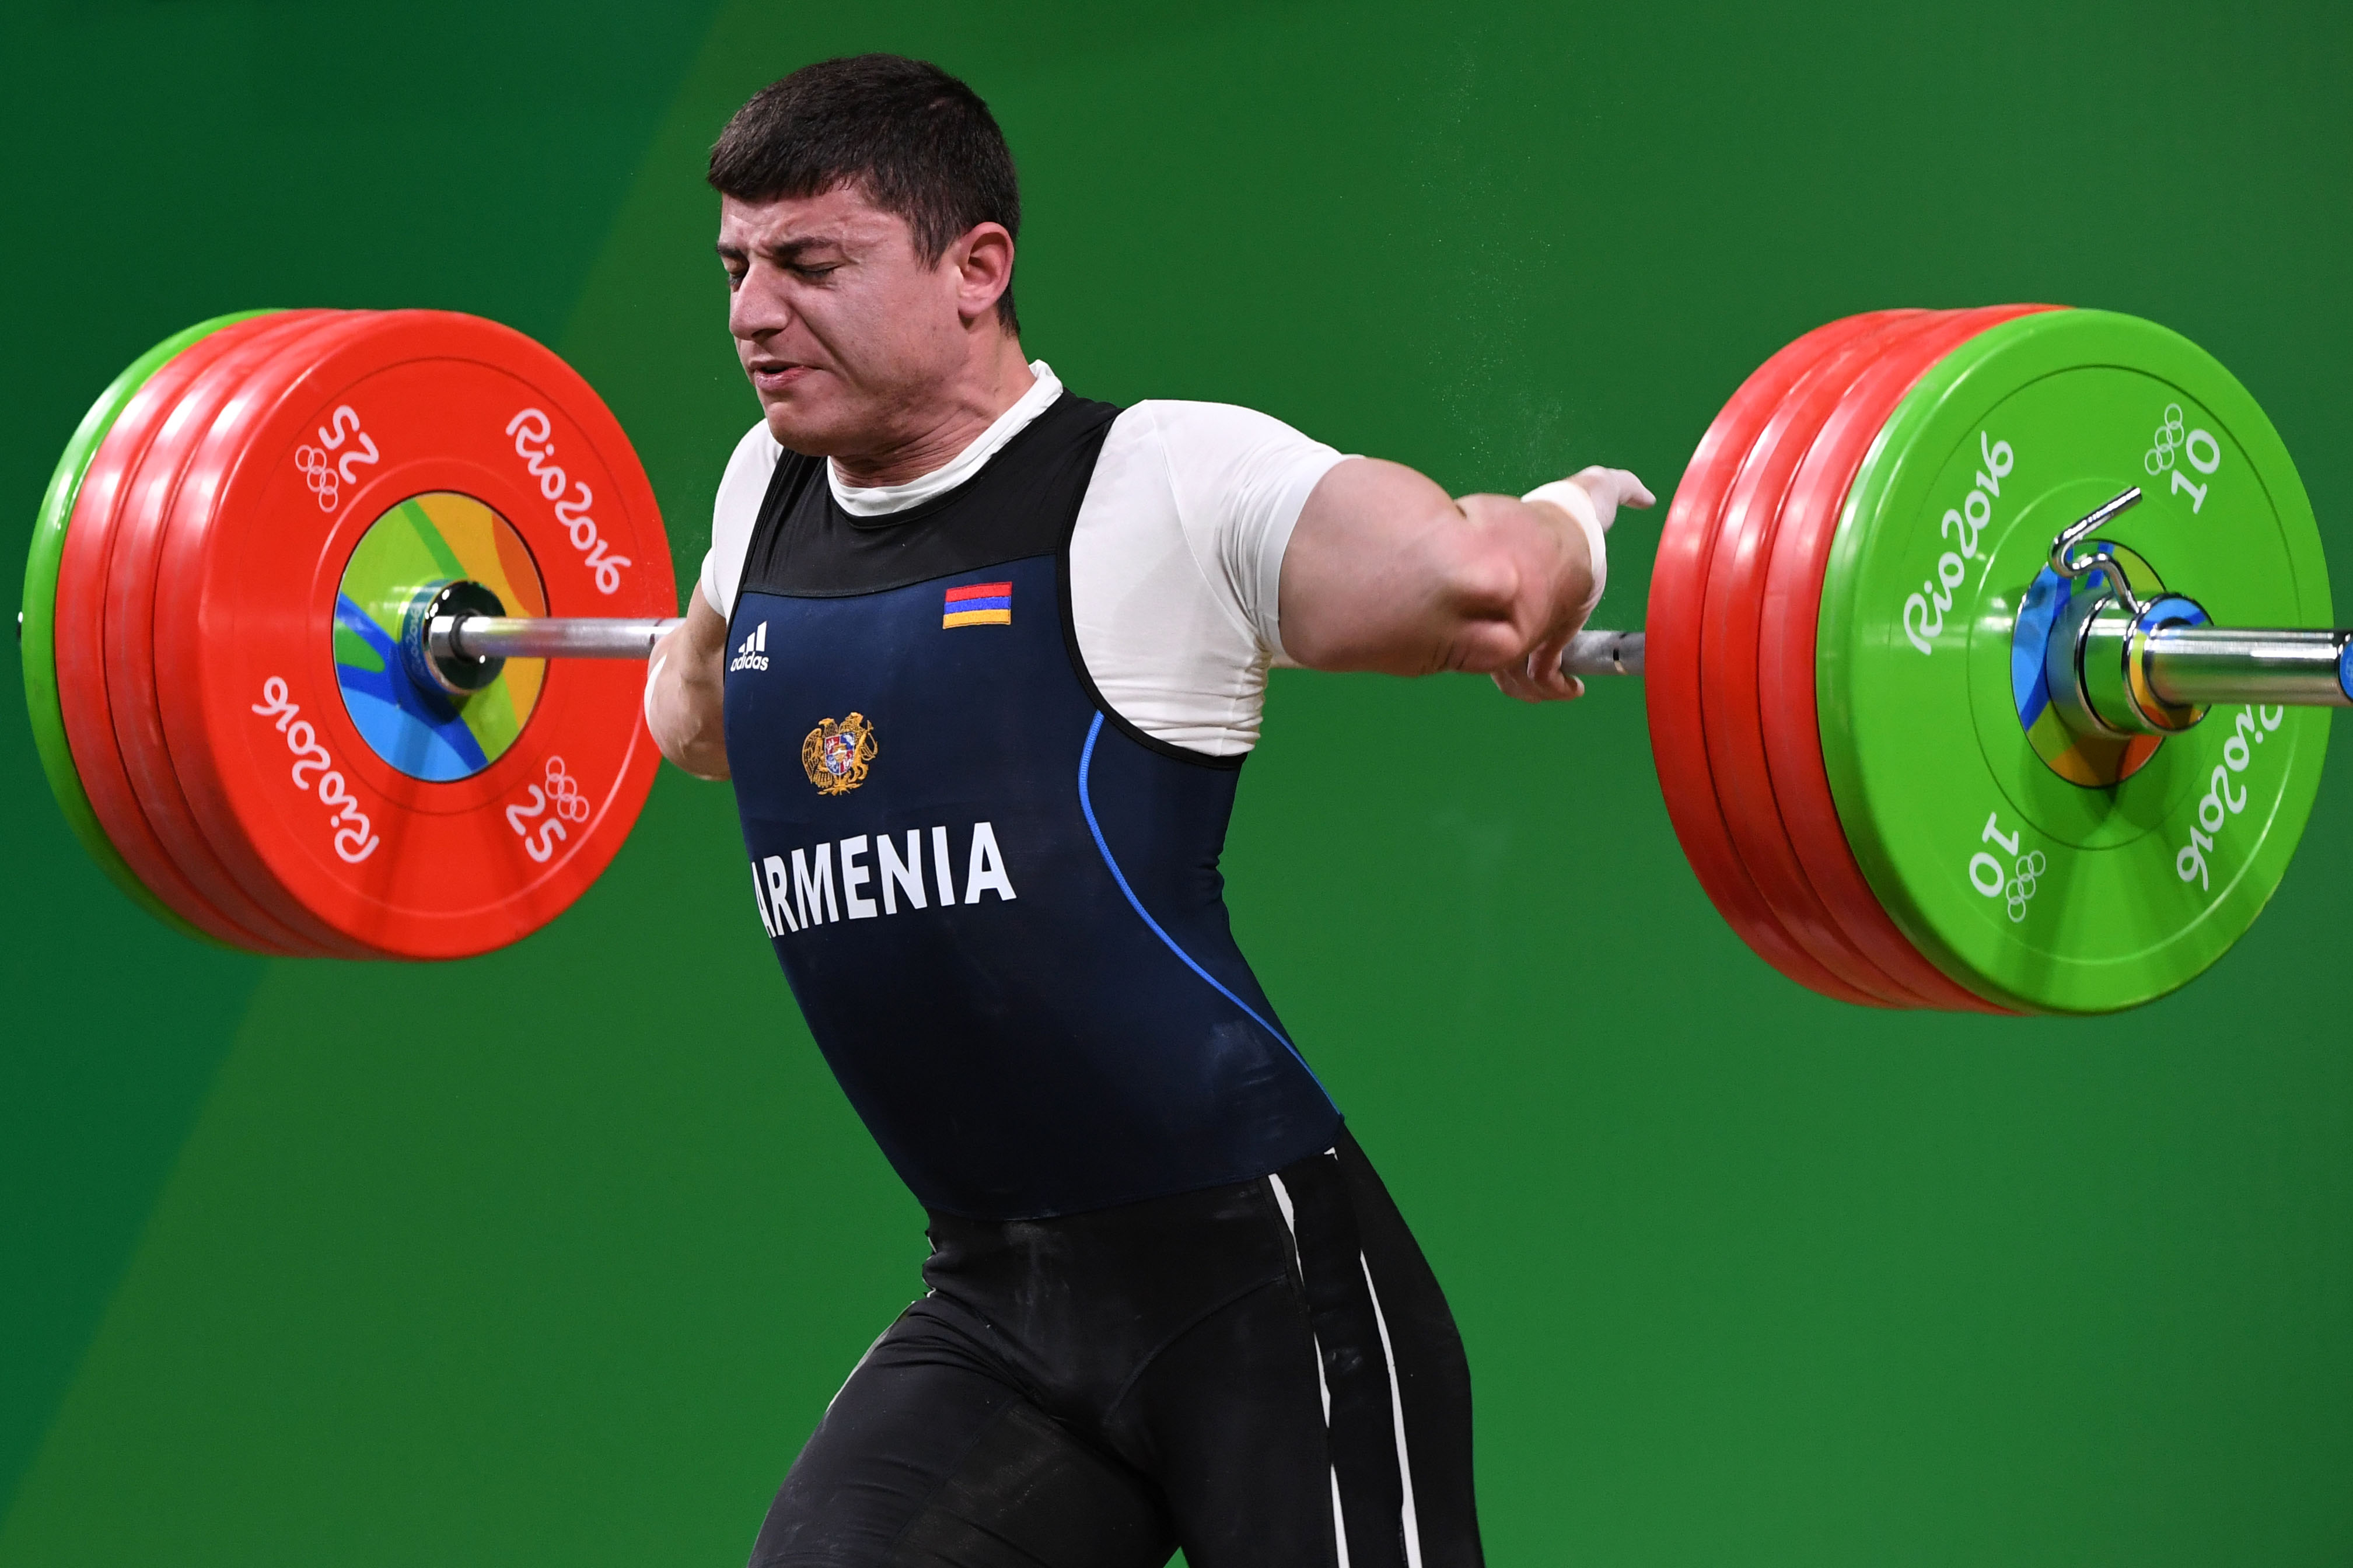 TOPSHOT - Armenia's Andranik Karapetyan sustains an injury while competing during the Men's 77kg weightlifting competition at the Rio 2016 Olympic Games in Rio de Janeiro on August 10, 2016. / AFP PHOTO / GOH Chai Hin